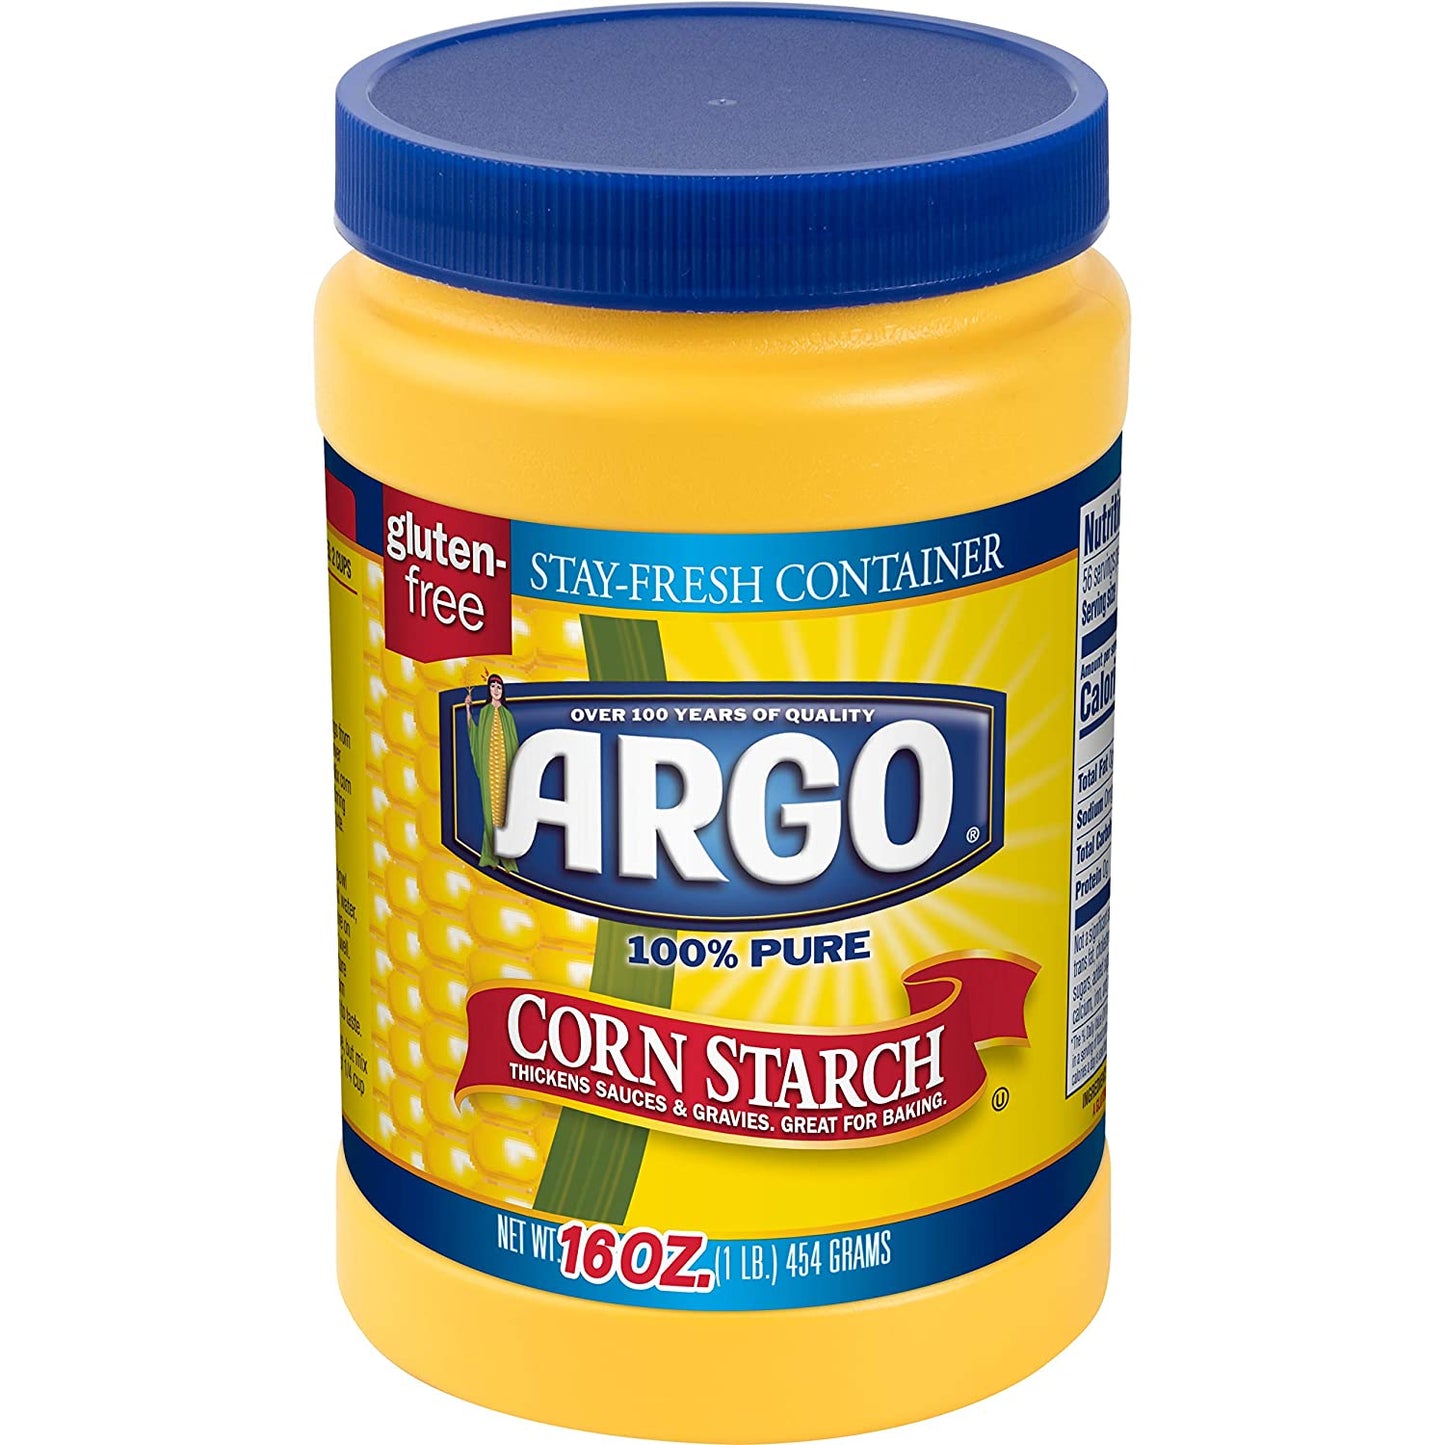 Argo 100% Pure Corn Starch, 16 Oz (Resealable Container)